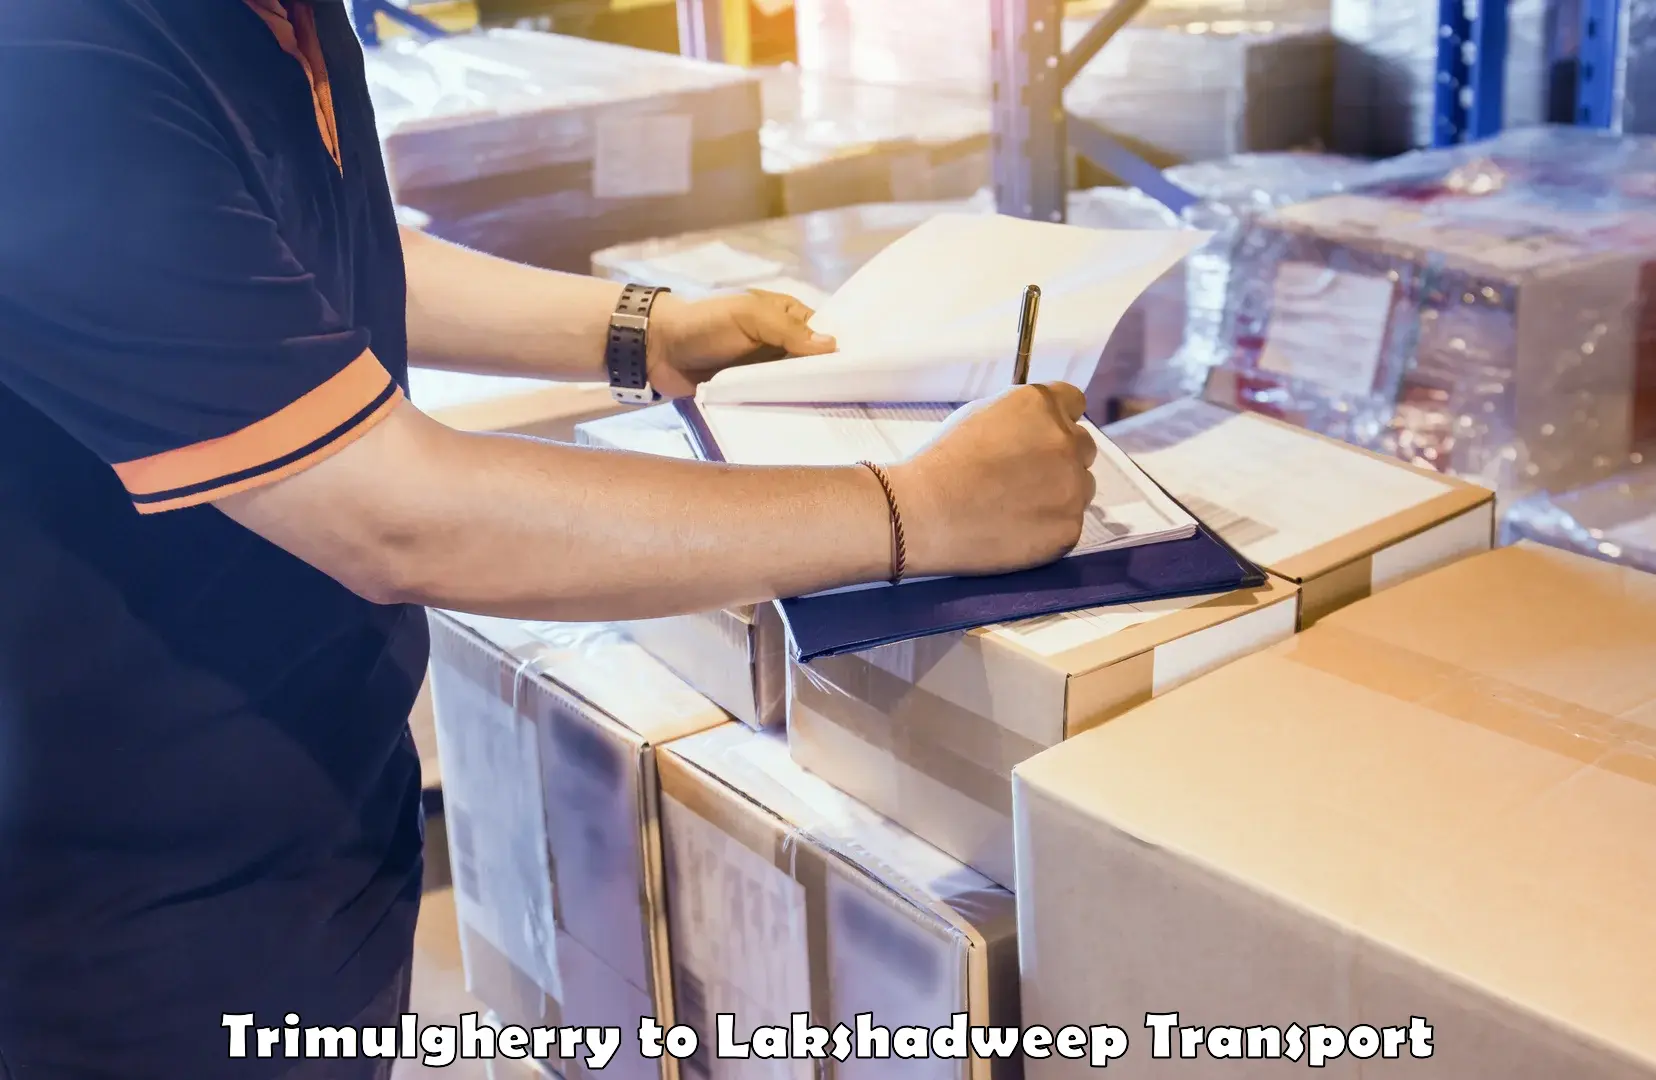 Road transport online services Trimulgherry to Lakshadweep